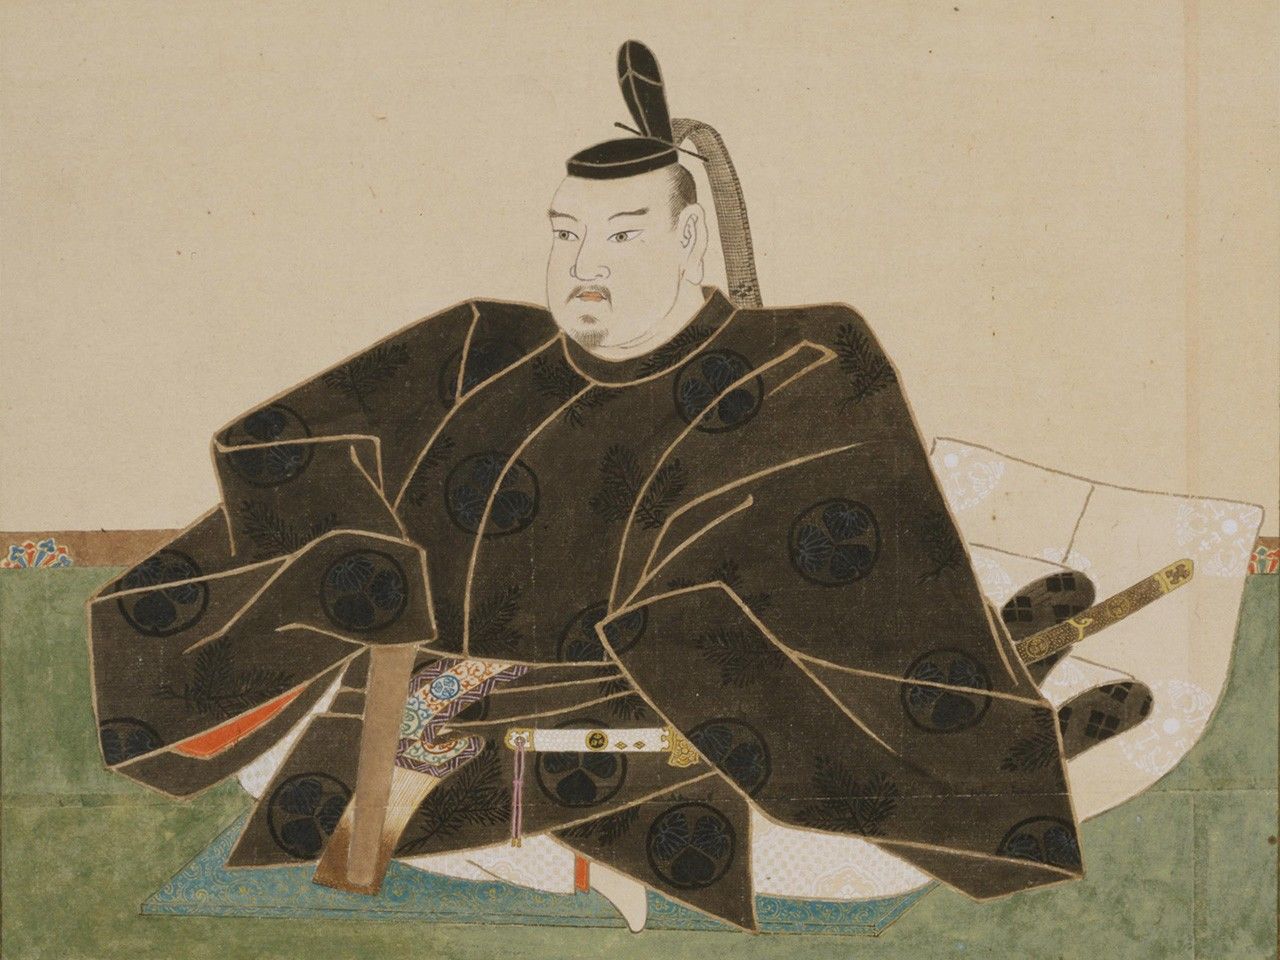 A portrait of Tokugawa Iemitsu. Although he became shōgun when Hidetada abdicated in 1623, his father retained actual power until his death in 1632. (Courtesy the Historiographical Institute, The University of Tokyo)